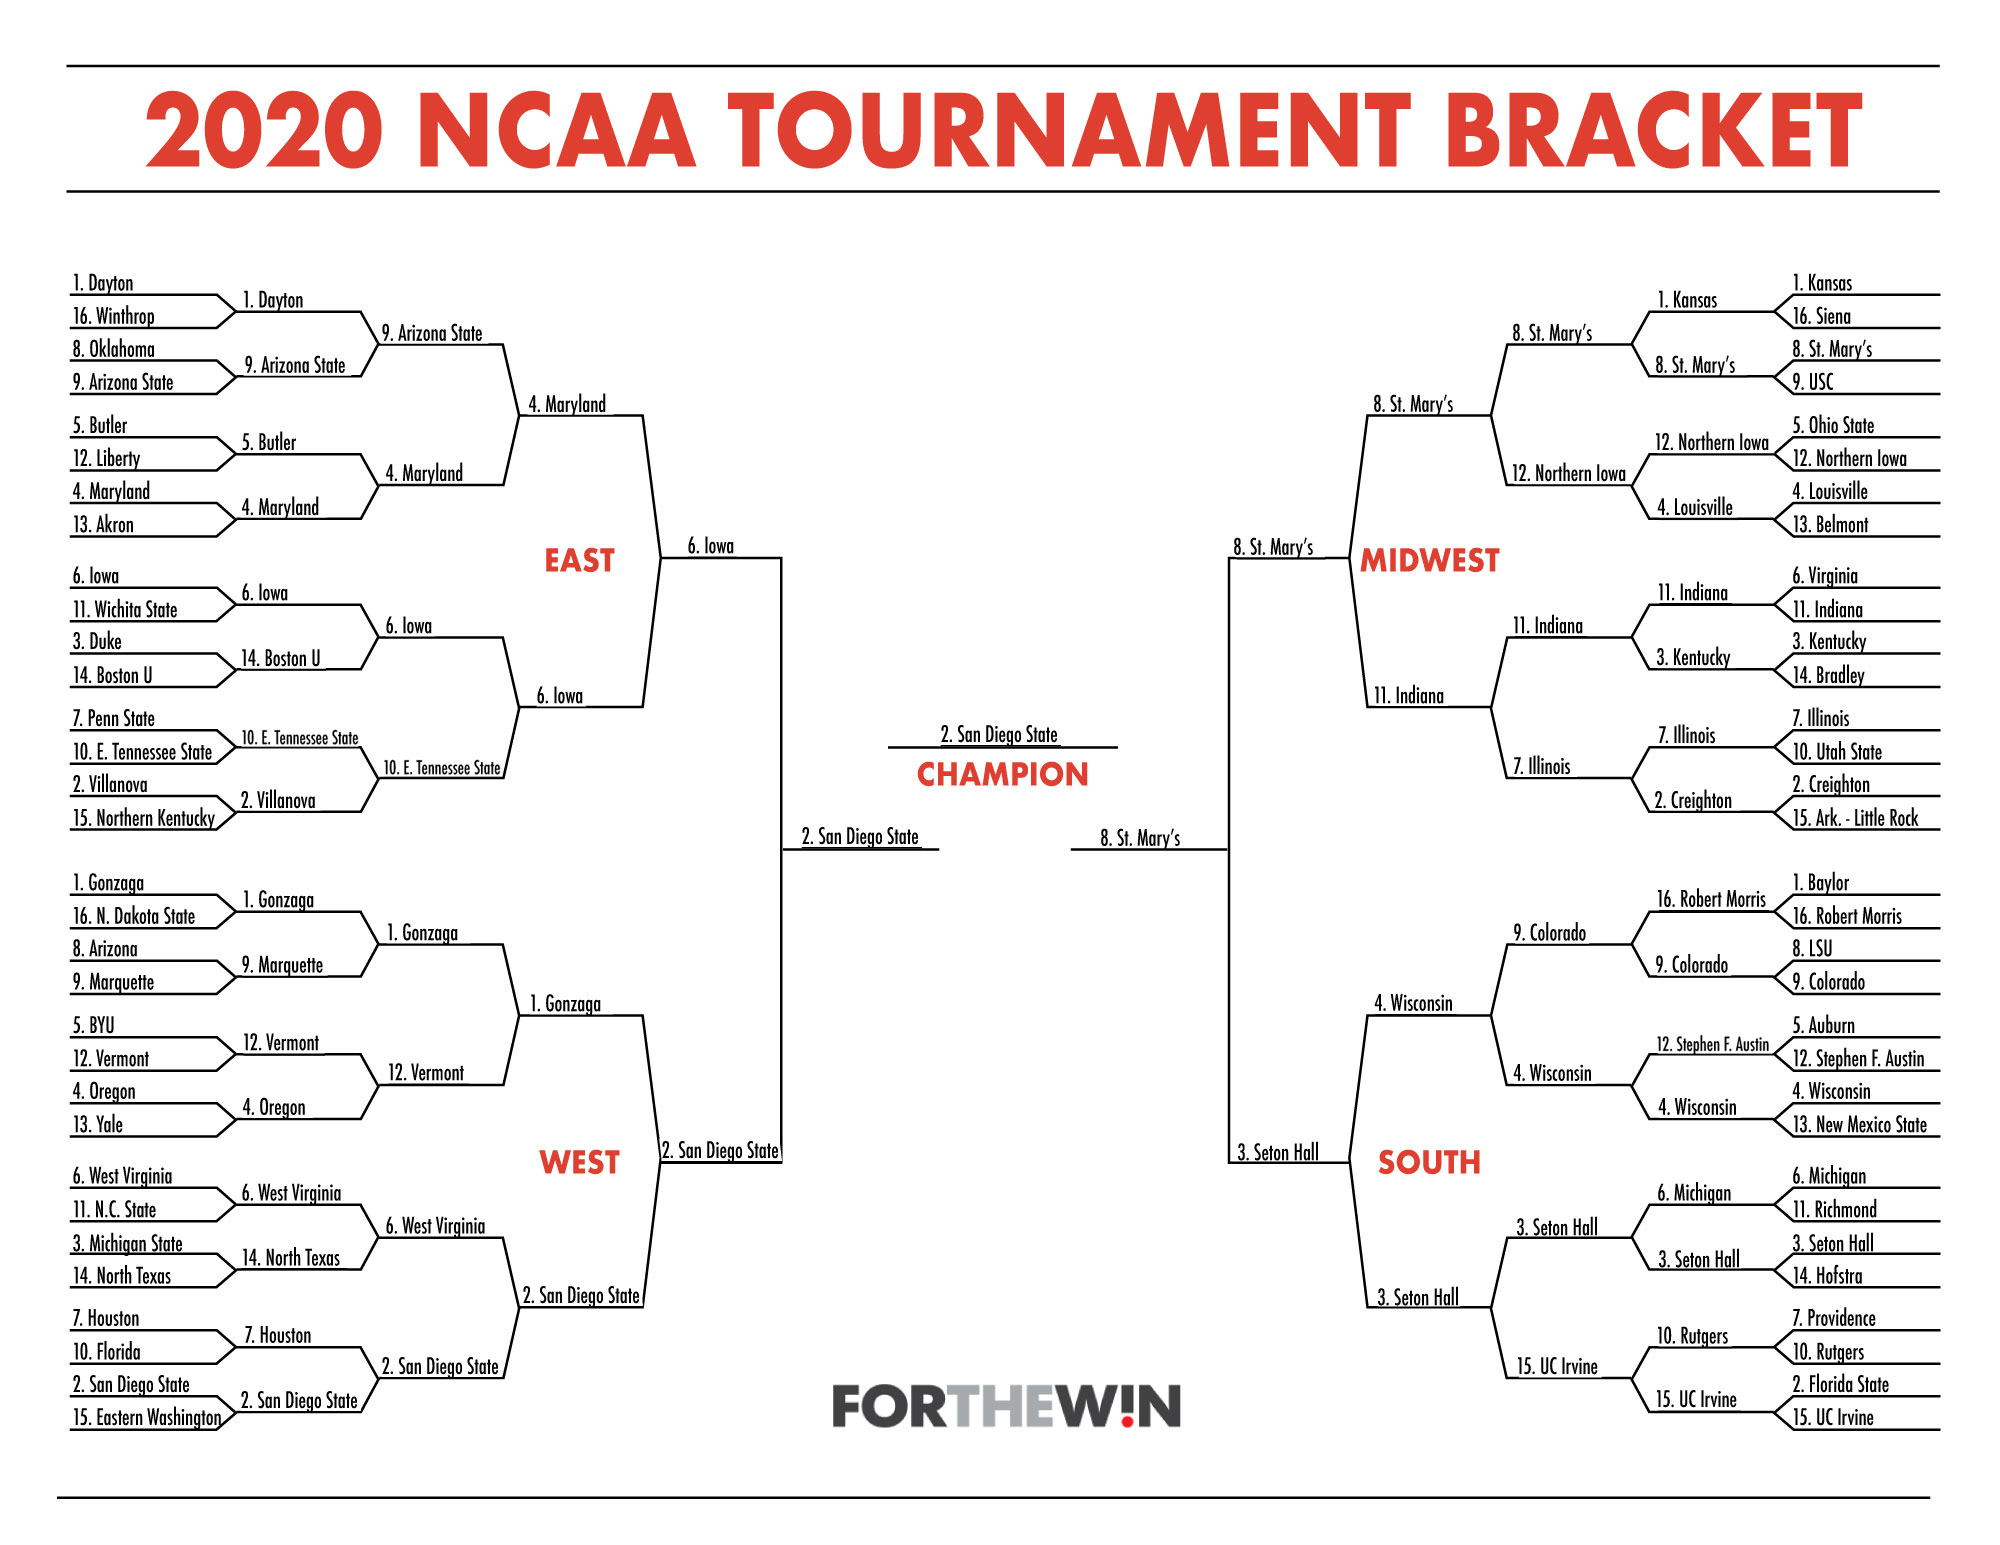 San Diego State is your 2020 NCAA Tournament Bracket champion | For The Win